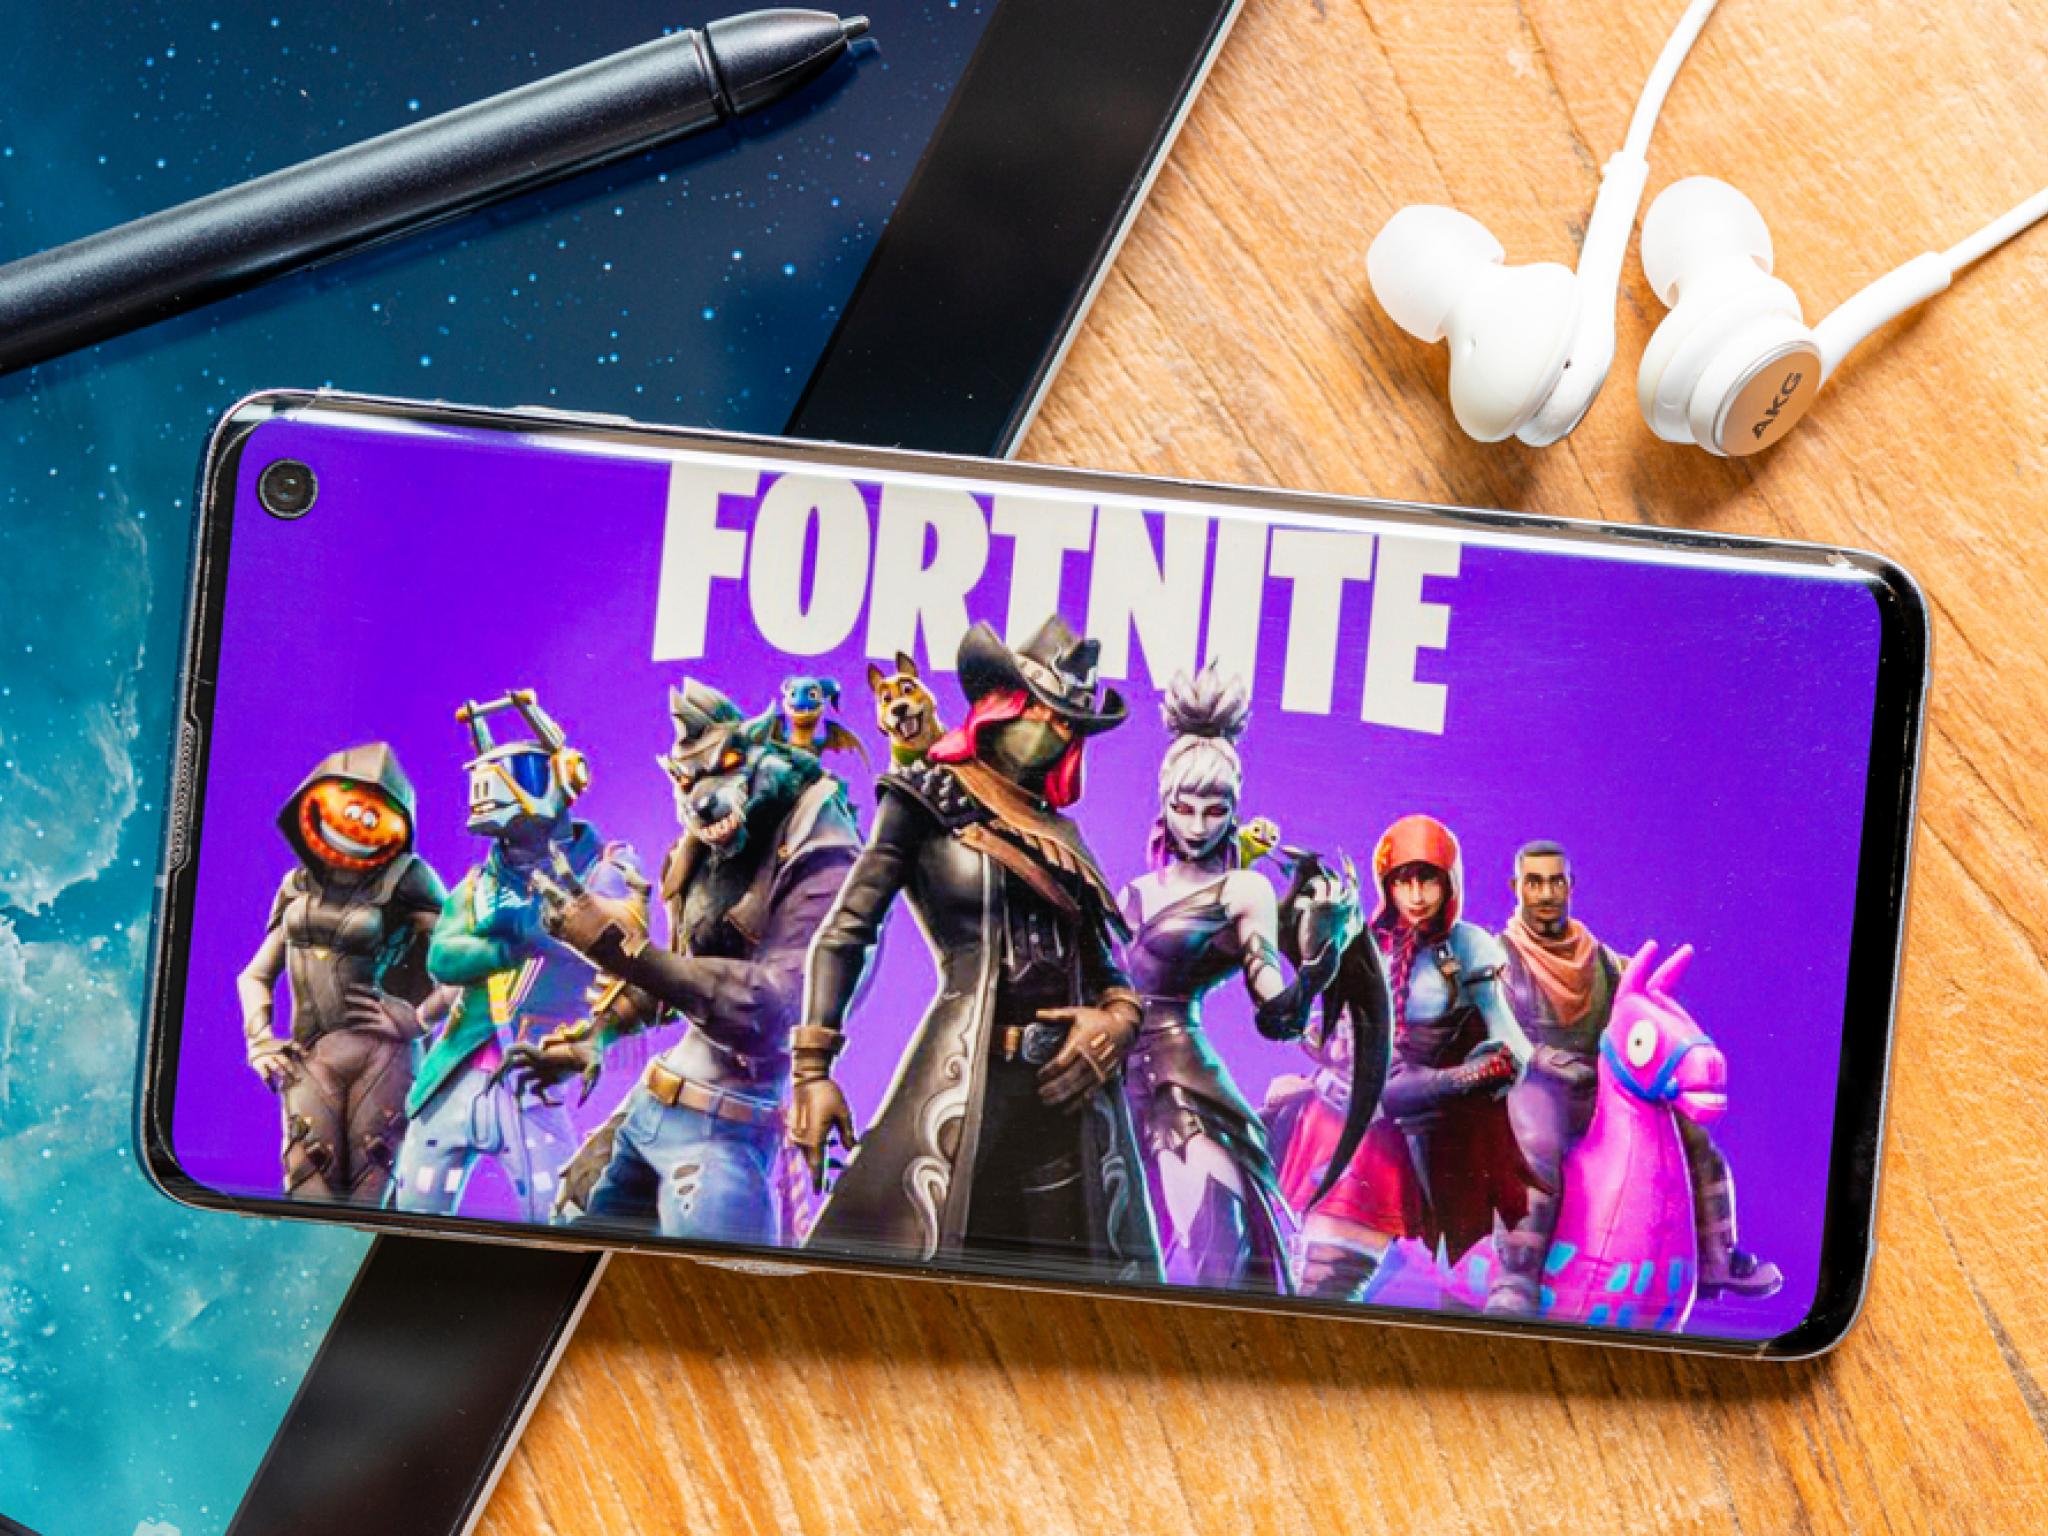  fortnite-maker-epic-games-accuses-apple-of-blocking-its-game-store-launch 